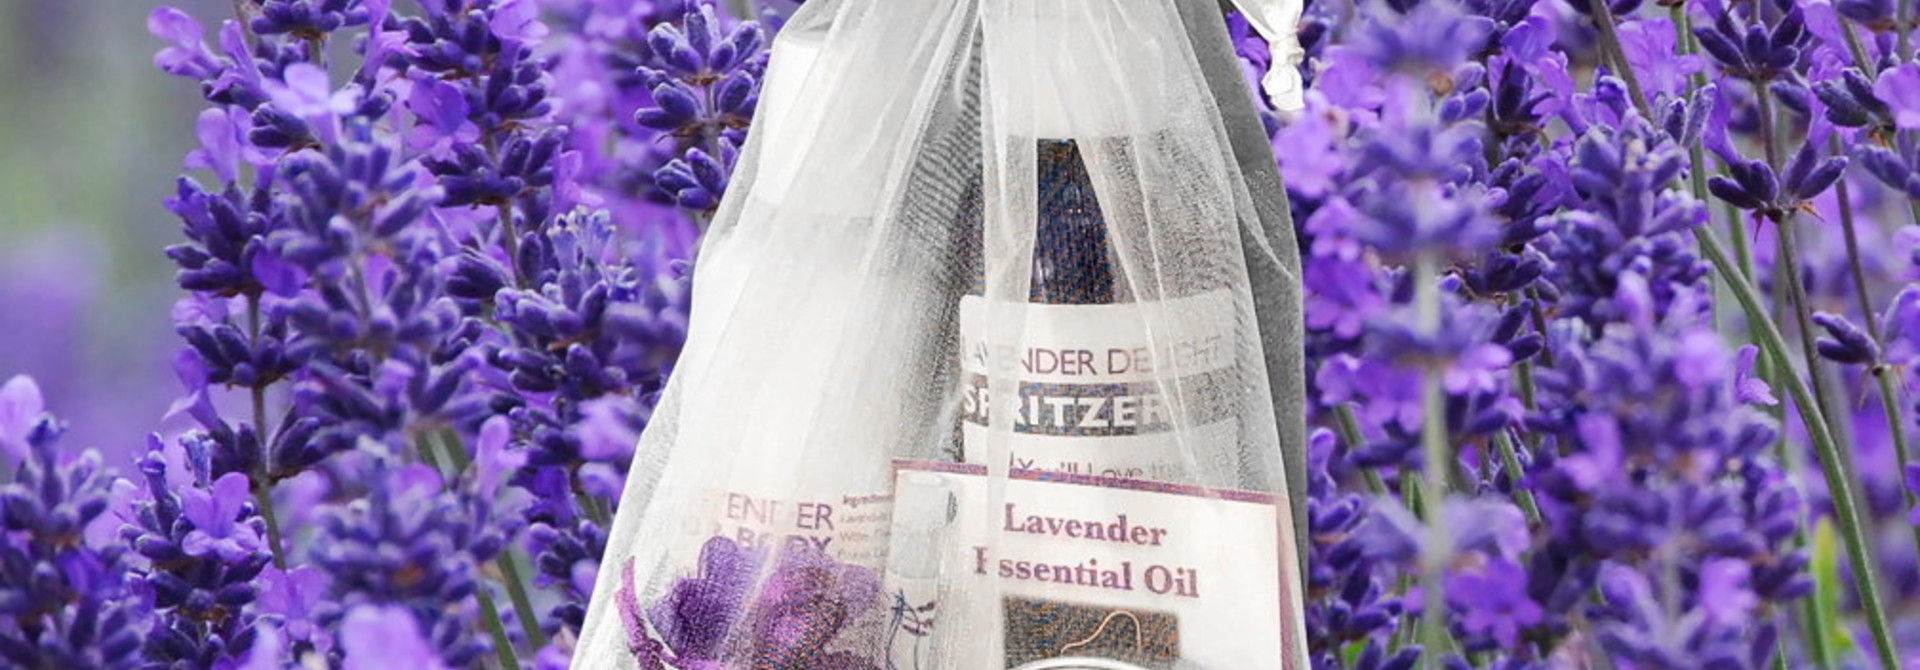 Lavender Gift Sets and certificates